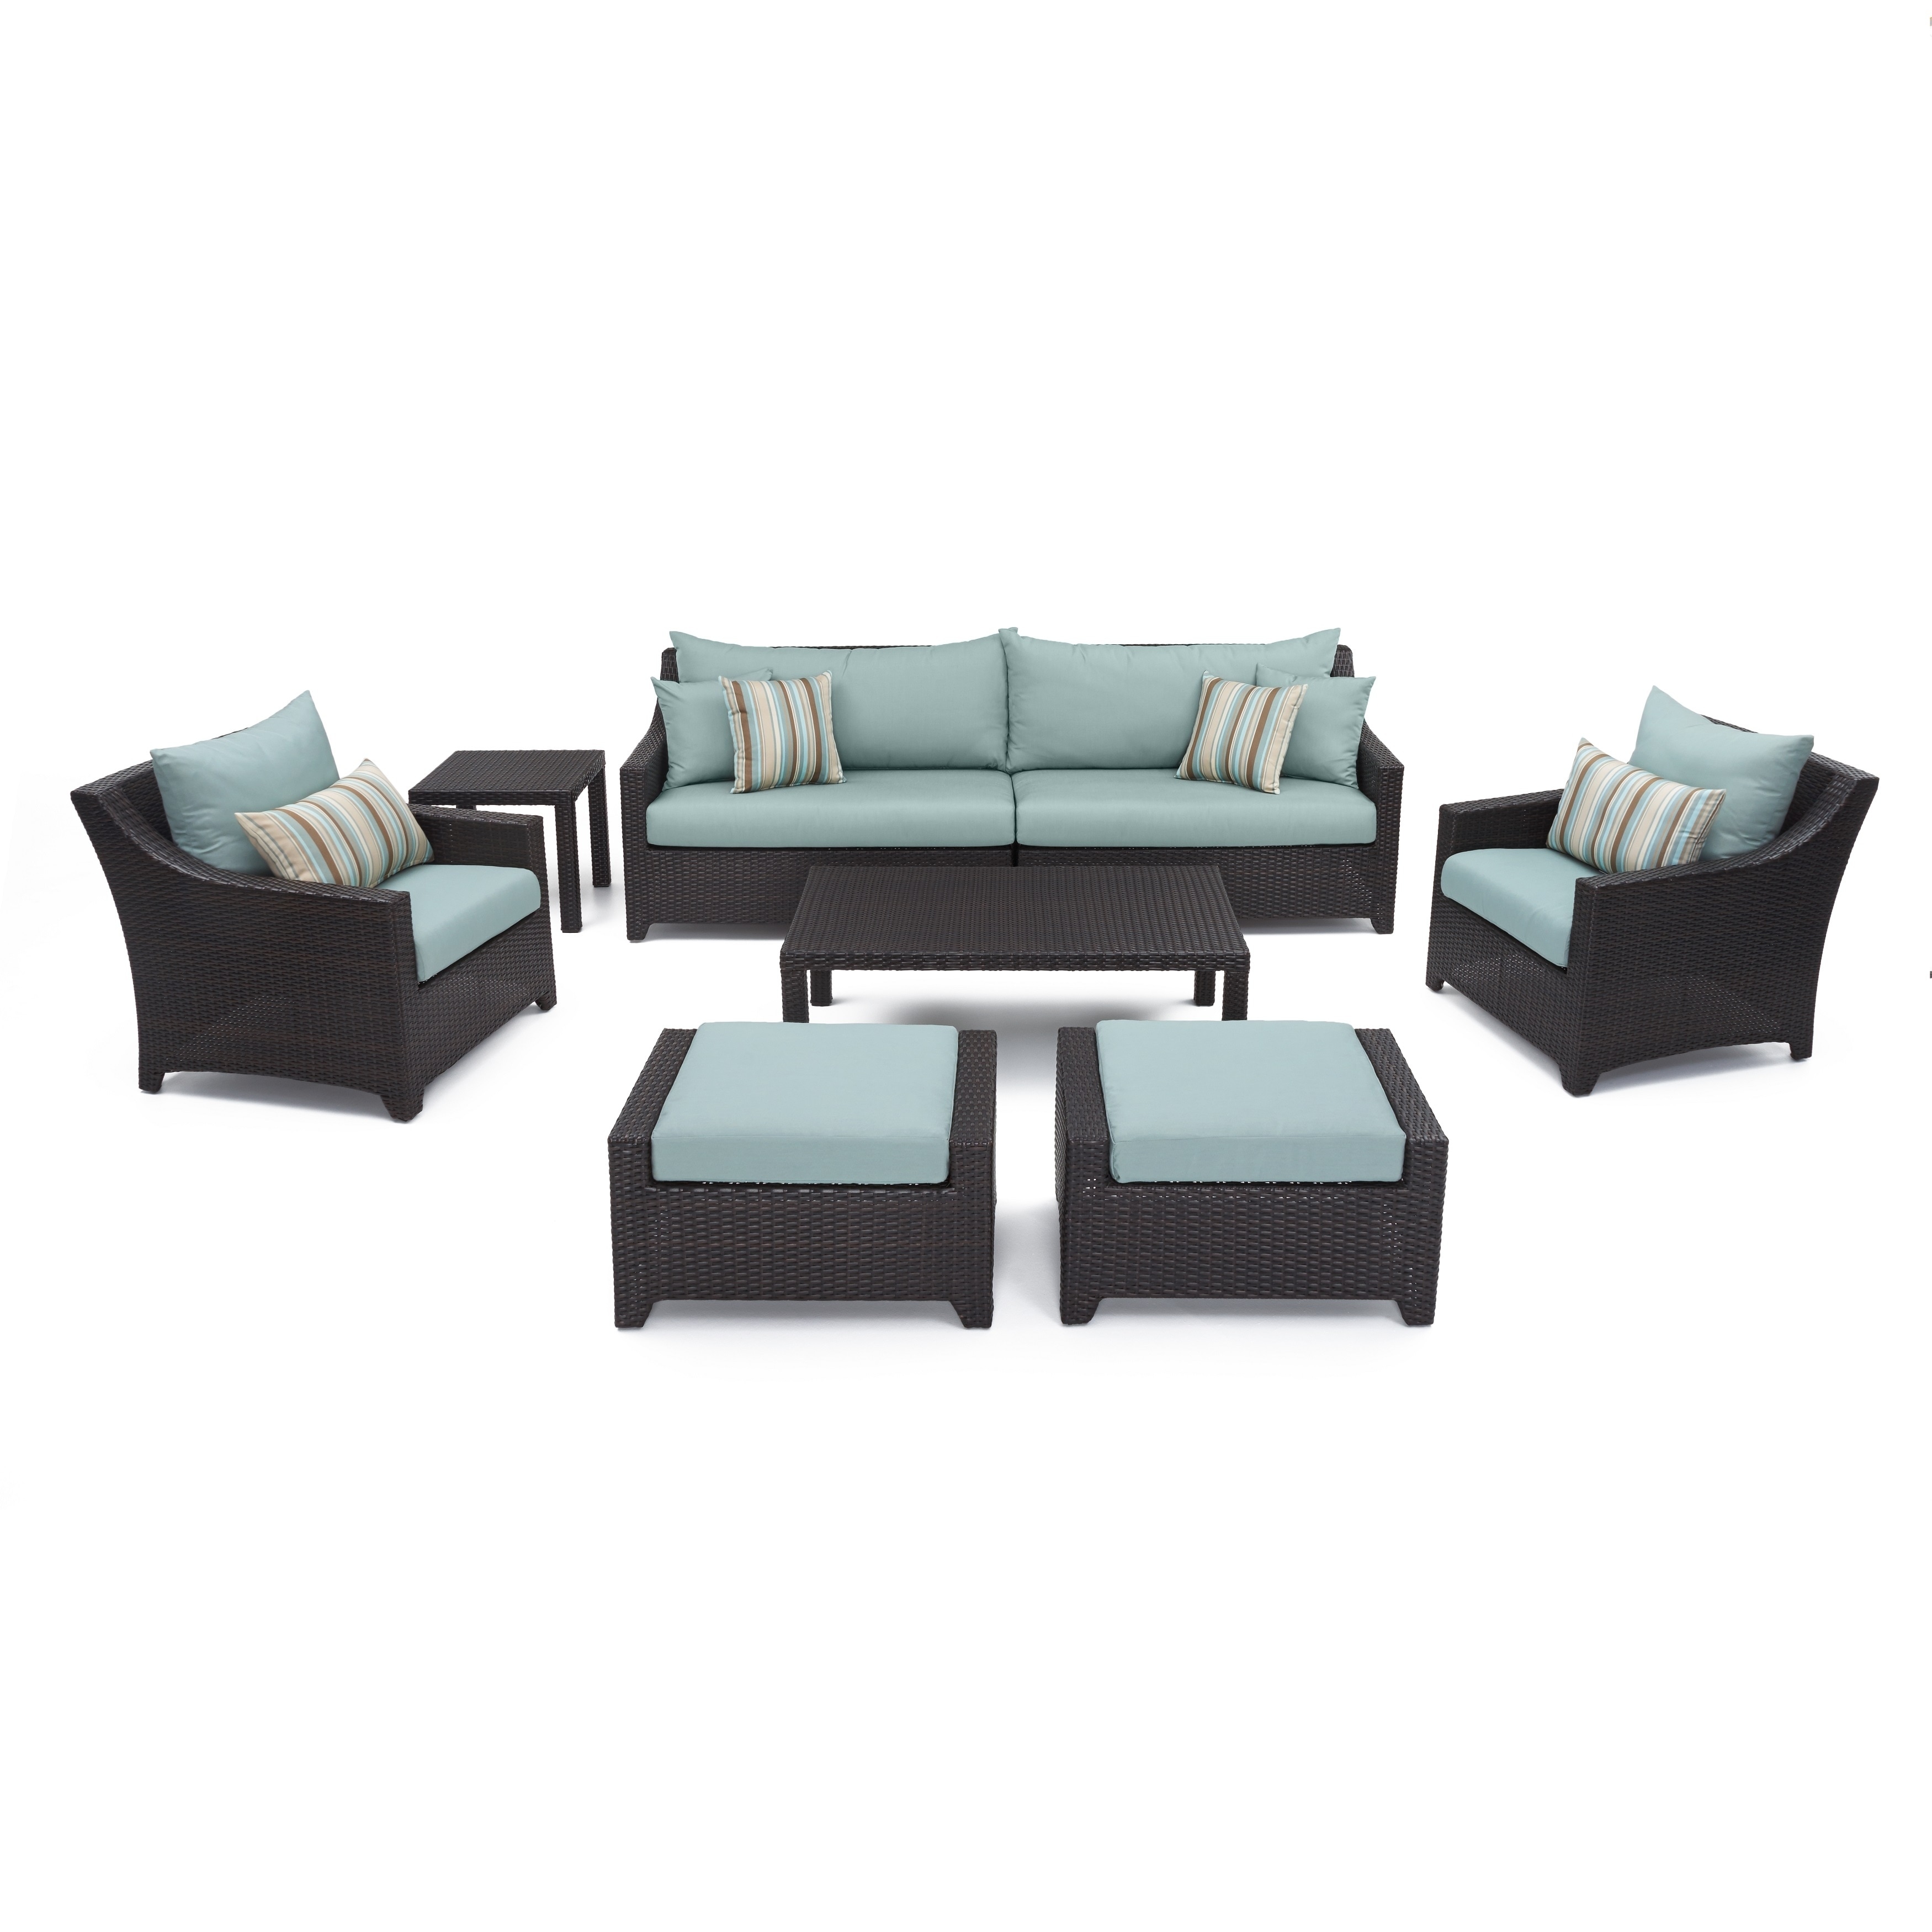 Rst Brands Rst Outdoor Bliss 8 piece Sofa, Club Chair And Ottomans Patio Furniture Set Blue Size 8 Piece Sets